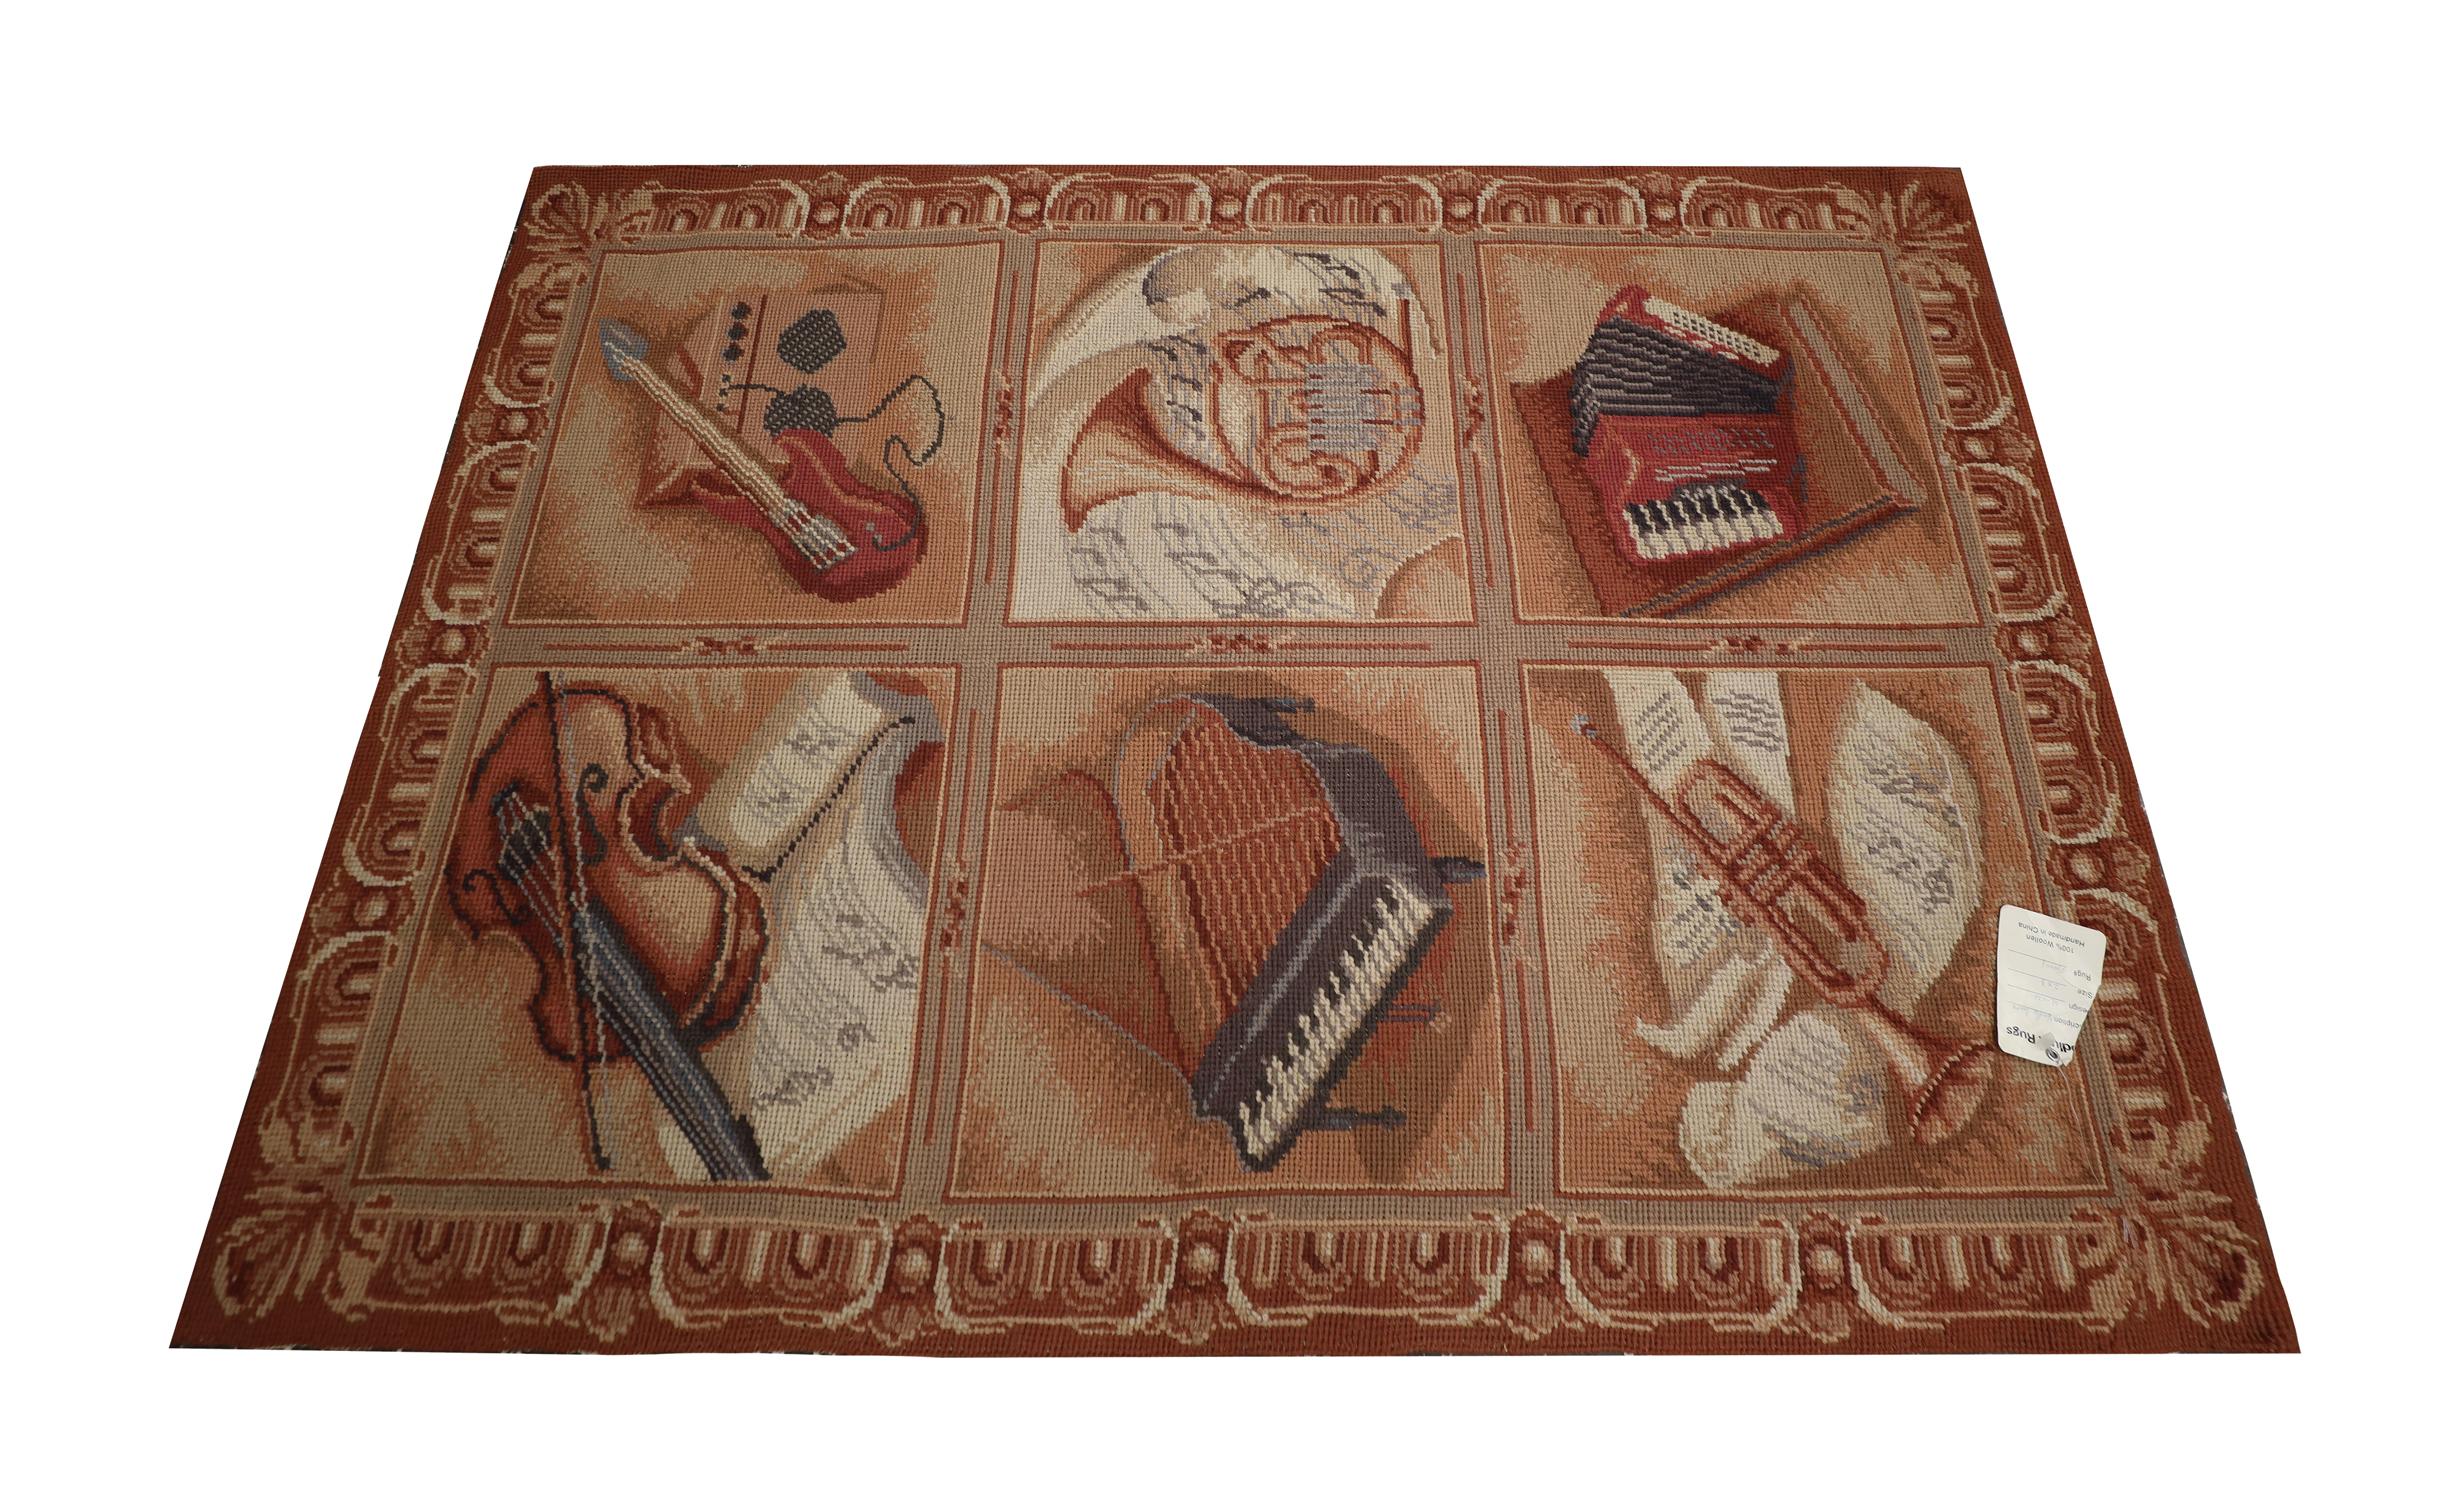 This unique needlepoint tapestry has been woven by hand and features a unique musical theme design. Made up of six square tiles that have been decorated with various musical instruments woven in rust, orange, brown and beige accent colours. The